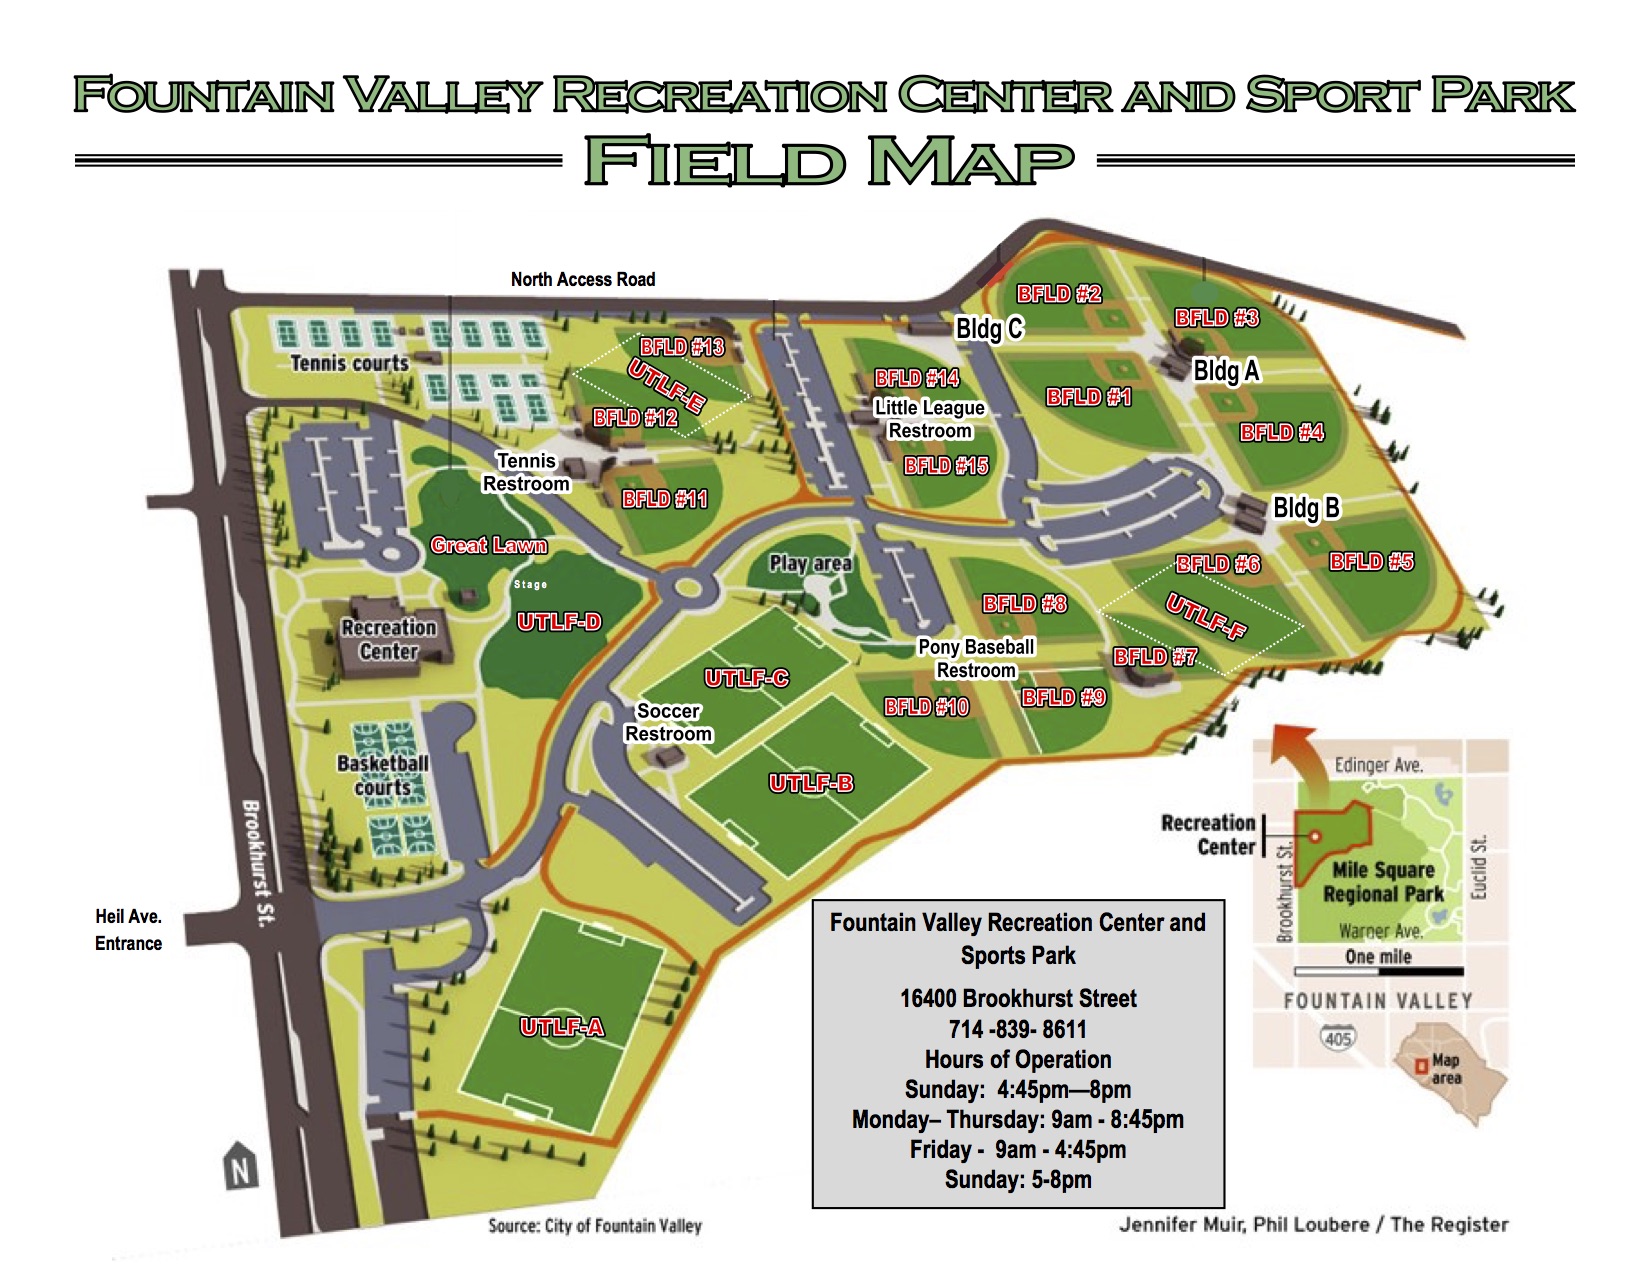 Fountain Valley Sports Park